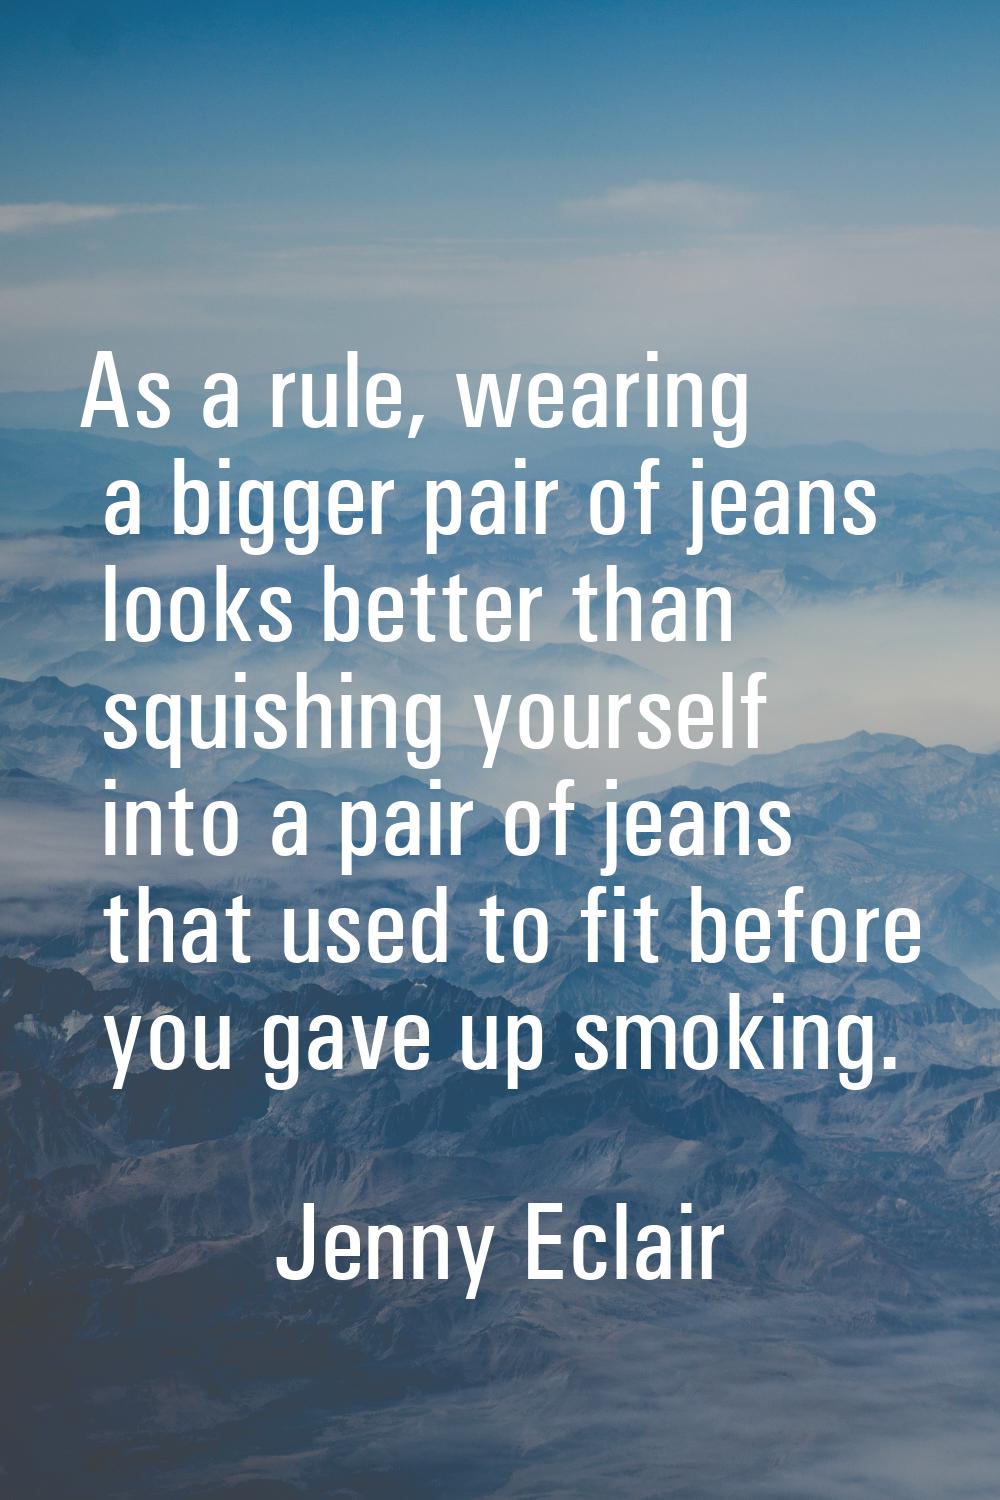 As a rule, wearing a bigger pair of jeans looks better than squishing yourself into a pair of jeans